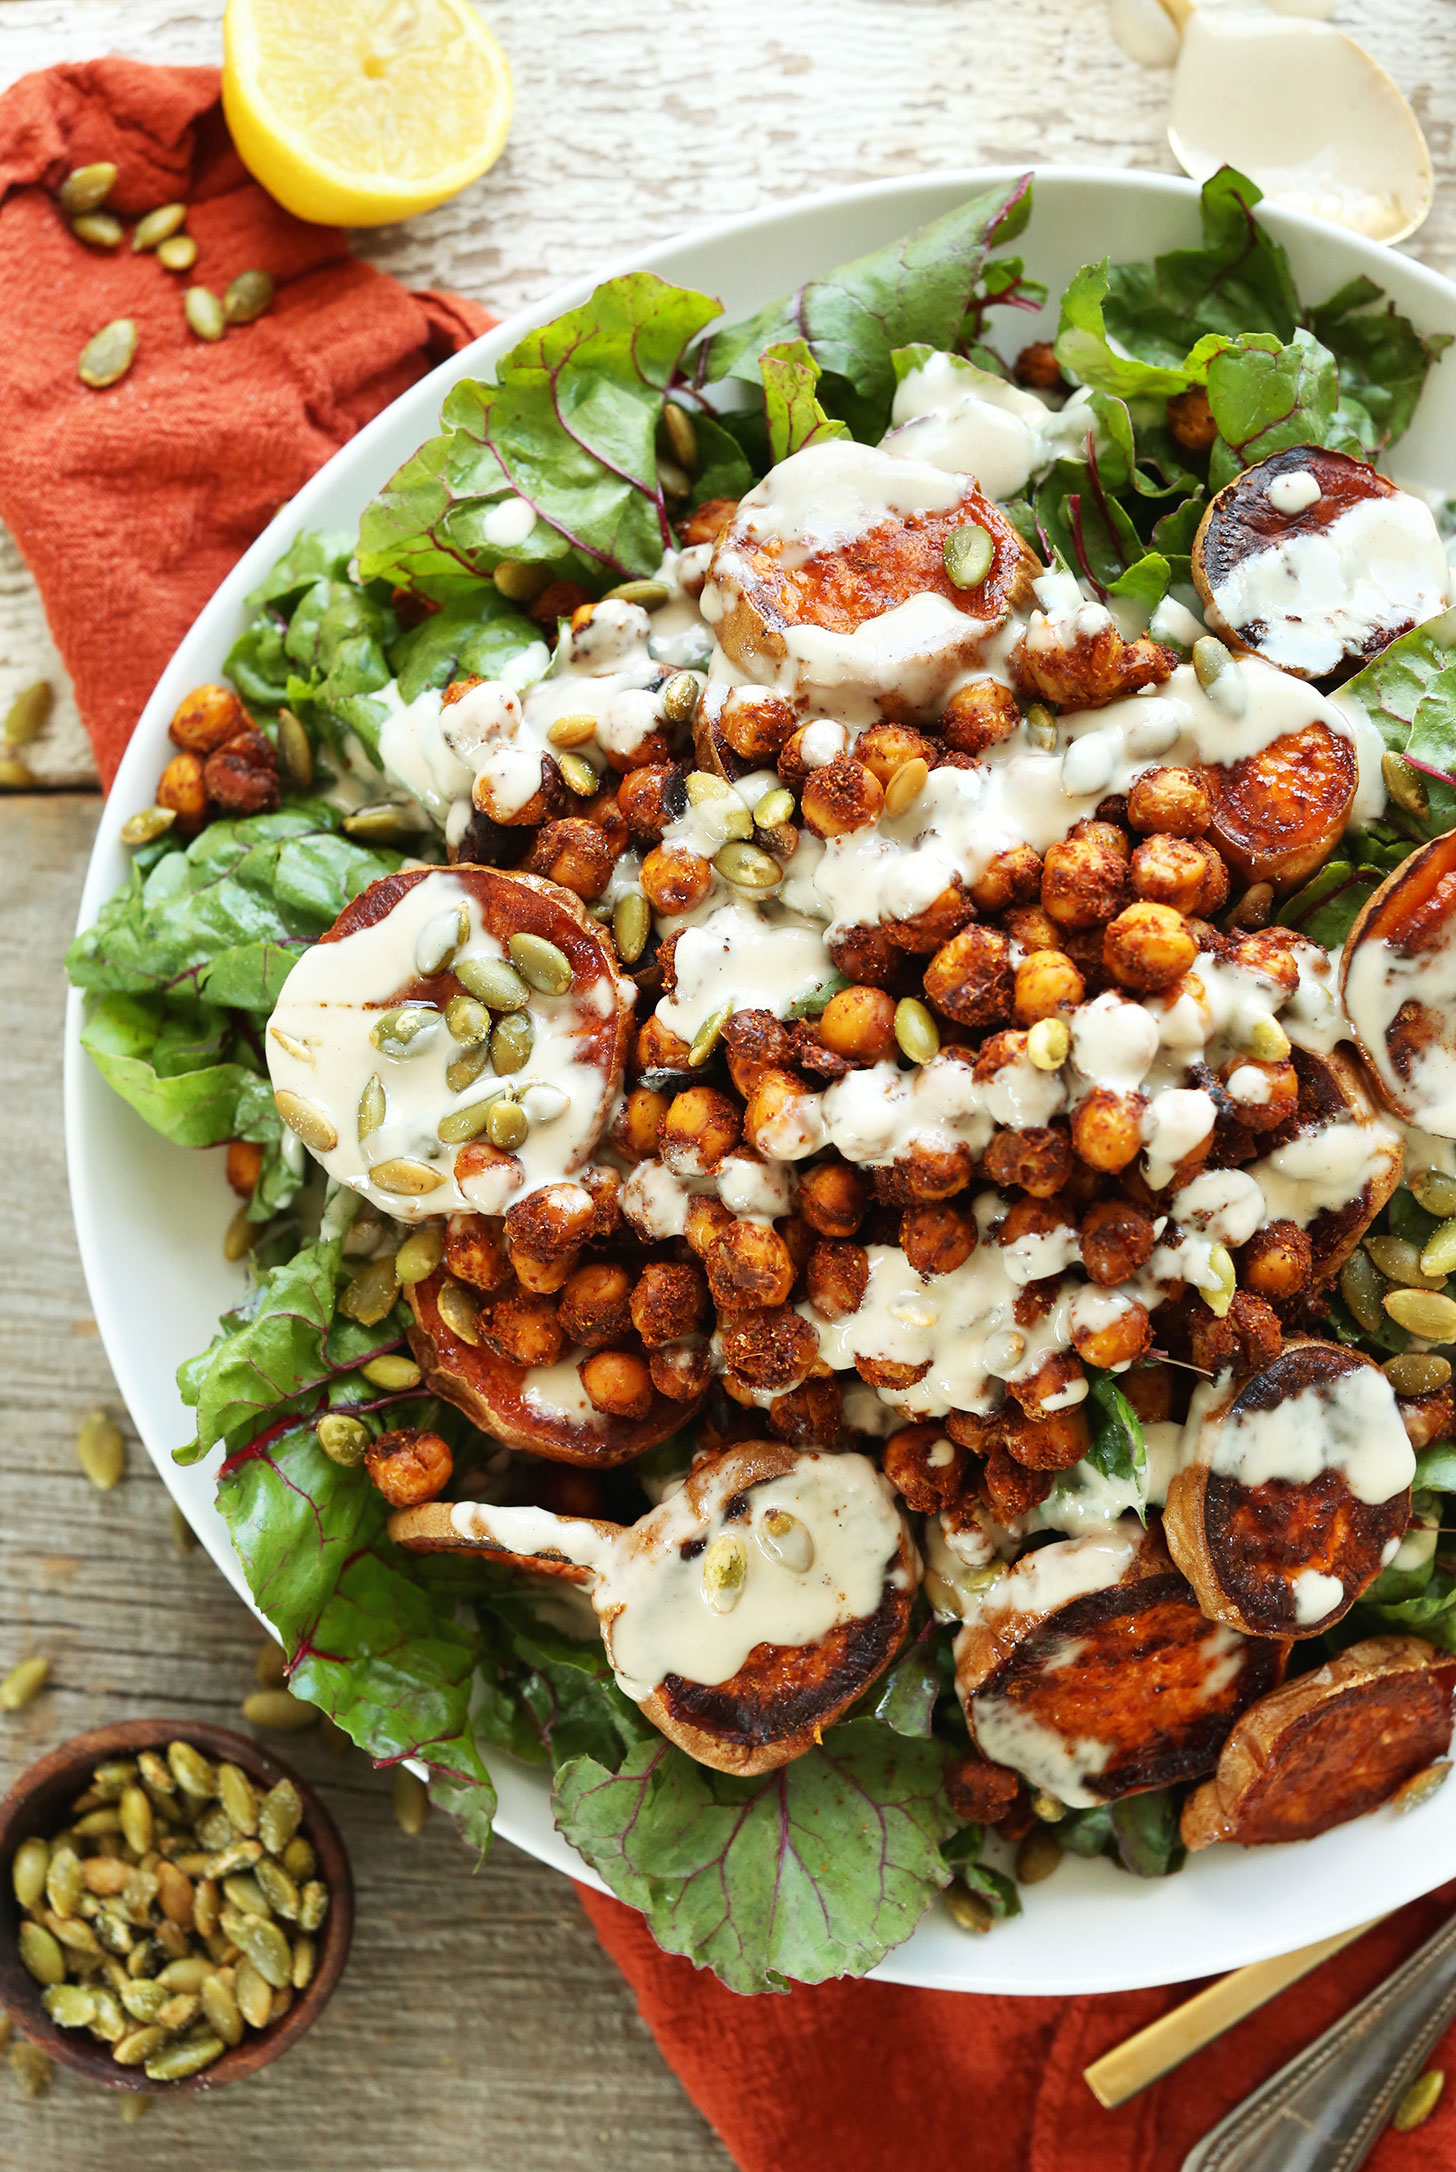 Big plate of our healthy Roasted Sweet Potato Crispy Chickpea Salad with Creamy Tahini Dressing